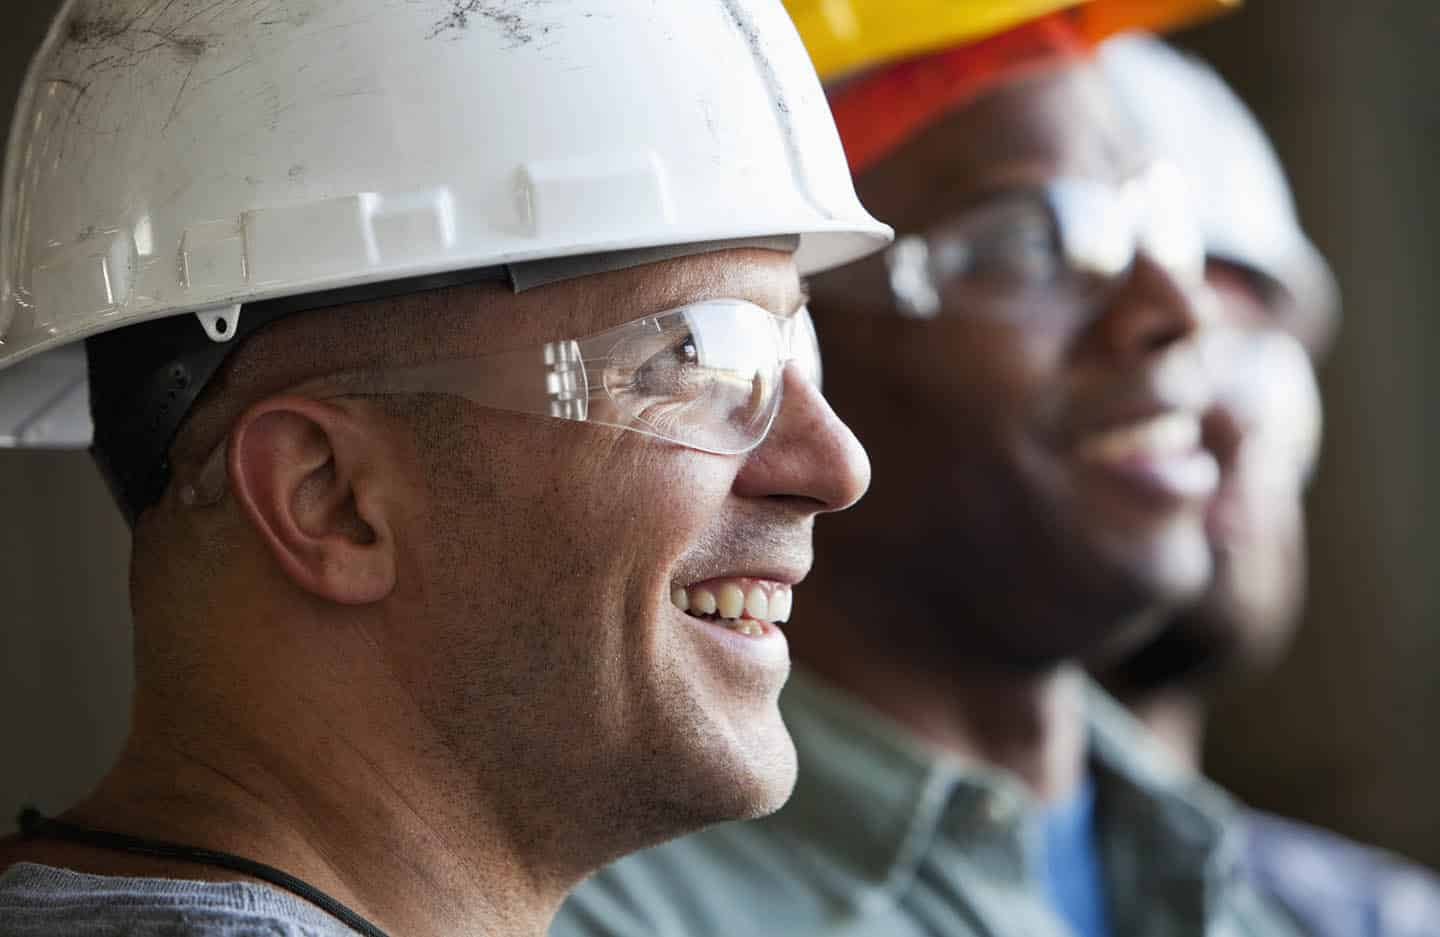 Close up of group of multi-ethnic construction workers wearing hard hats and safety glasses.  Focus on man in foreground (30s).